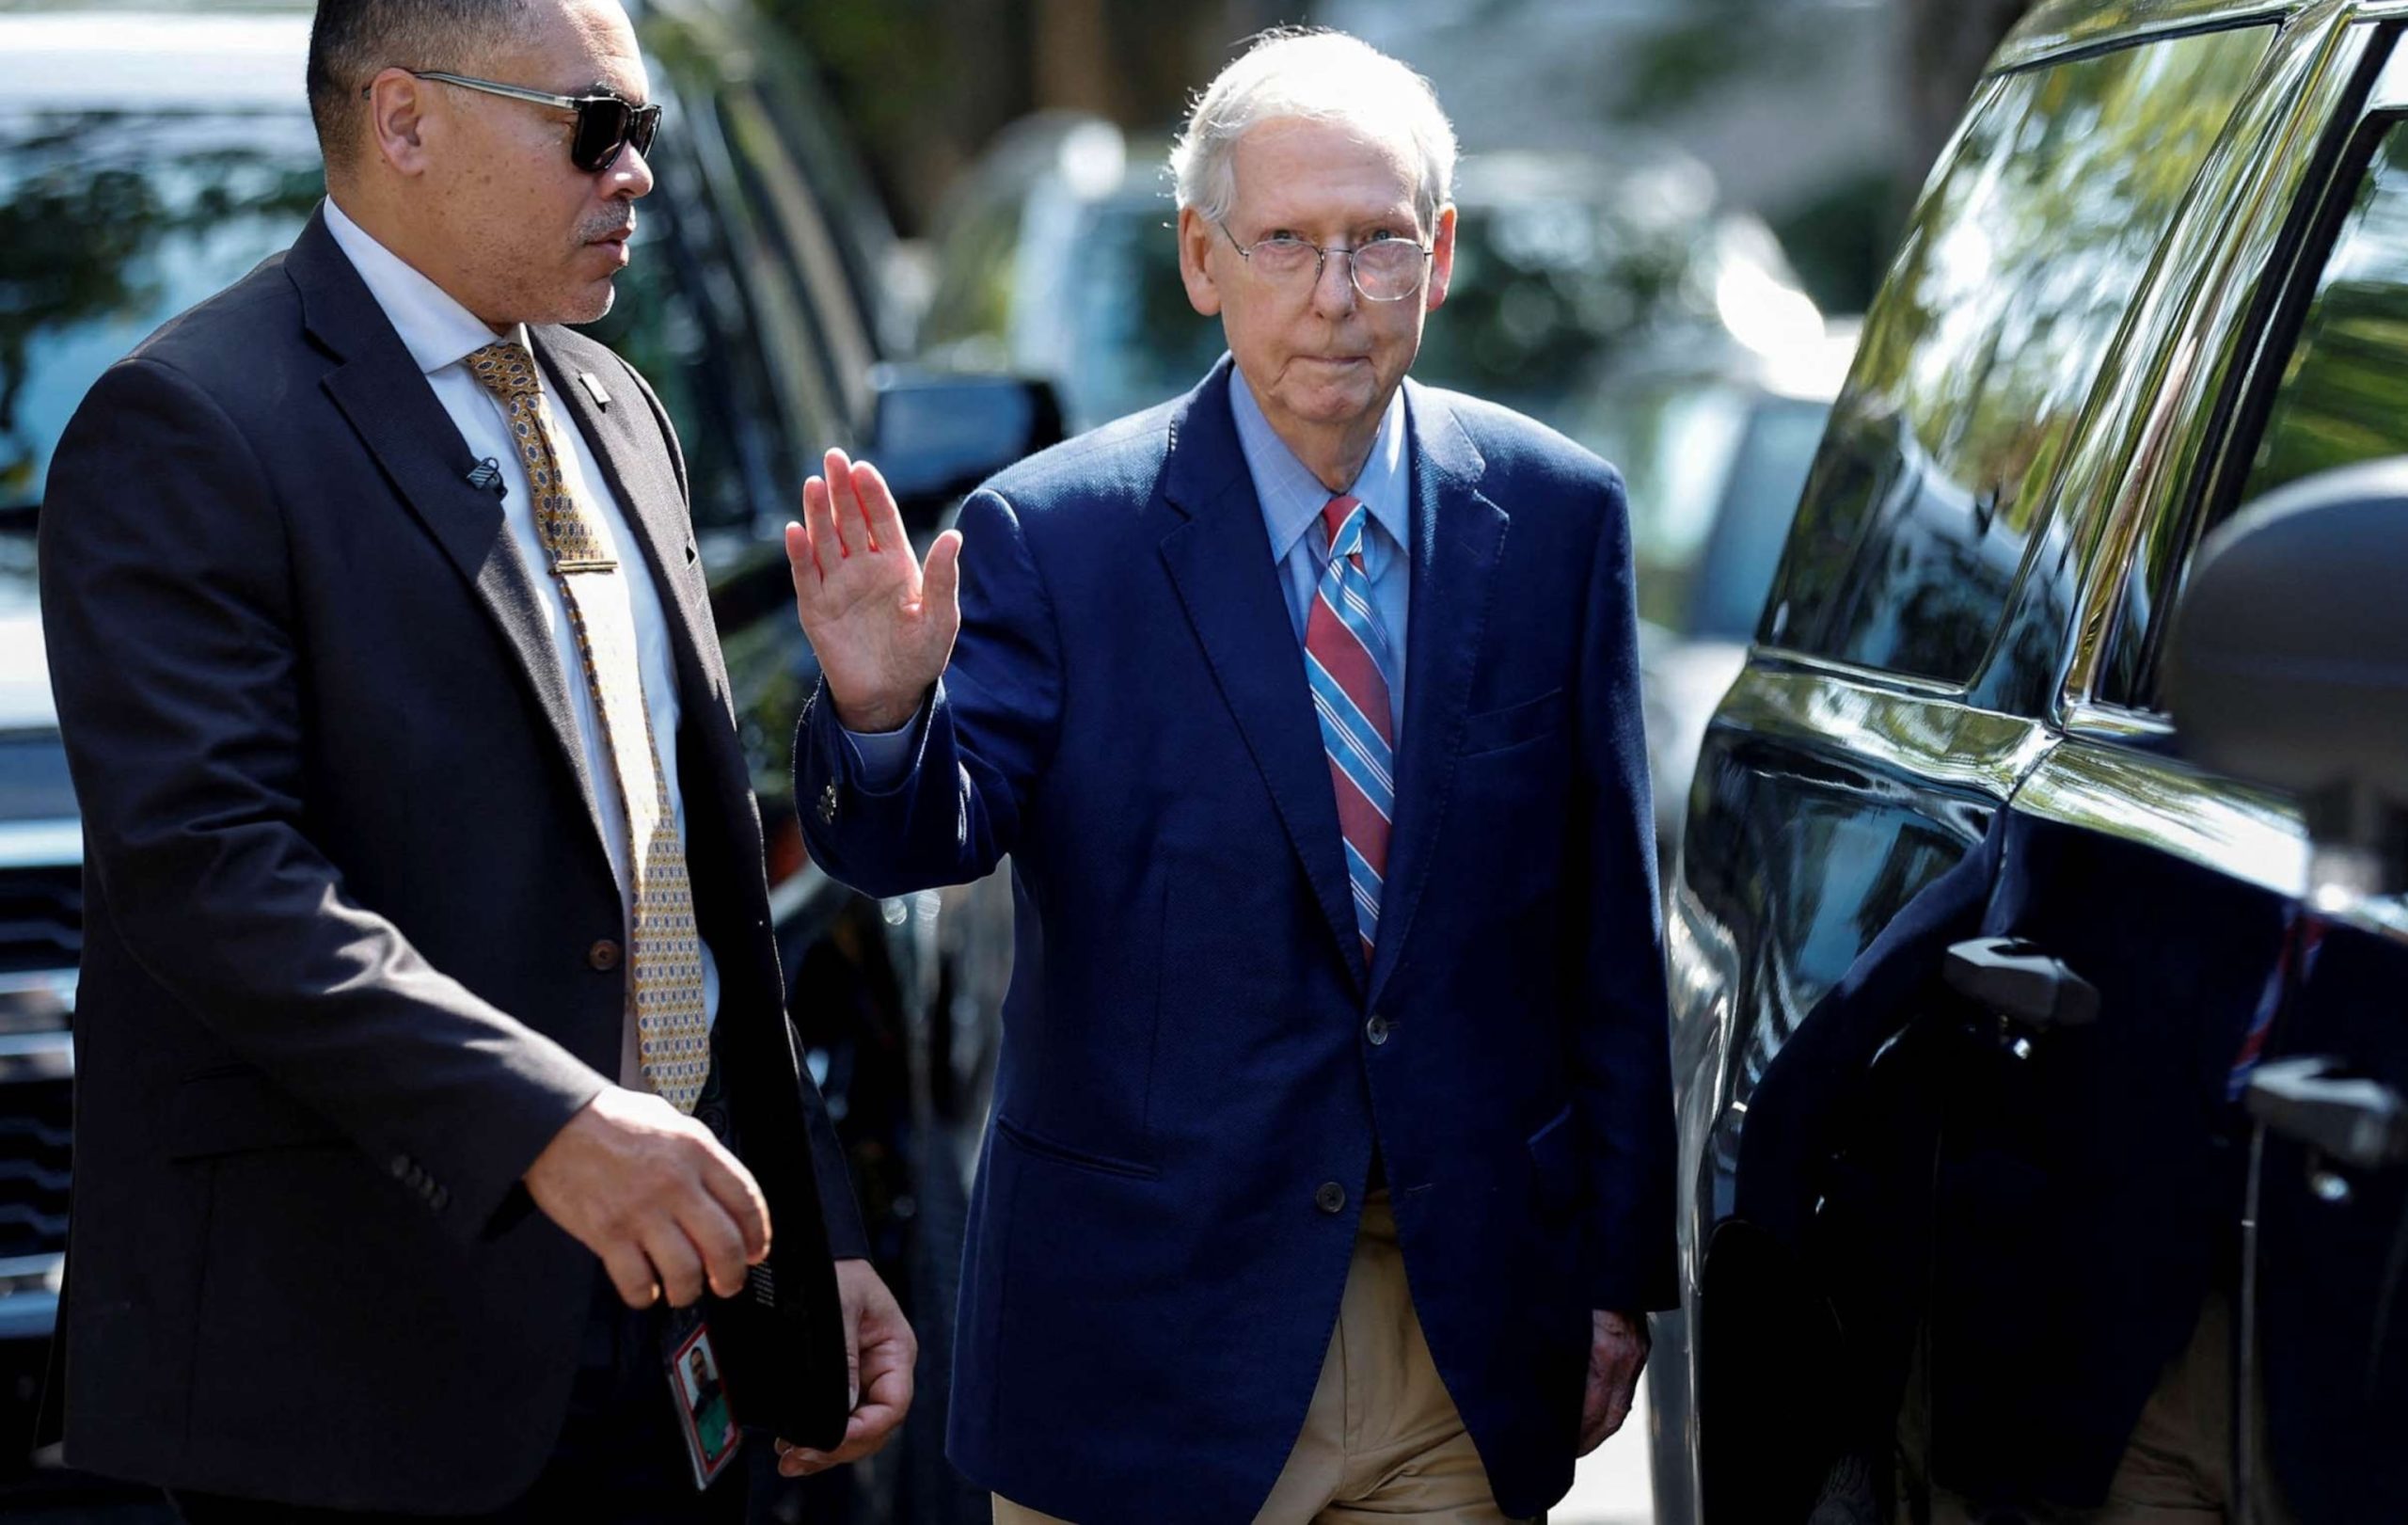 Mitch McConnell suggests that incident received significant attention after being frozen.